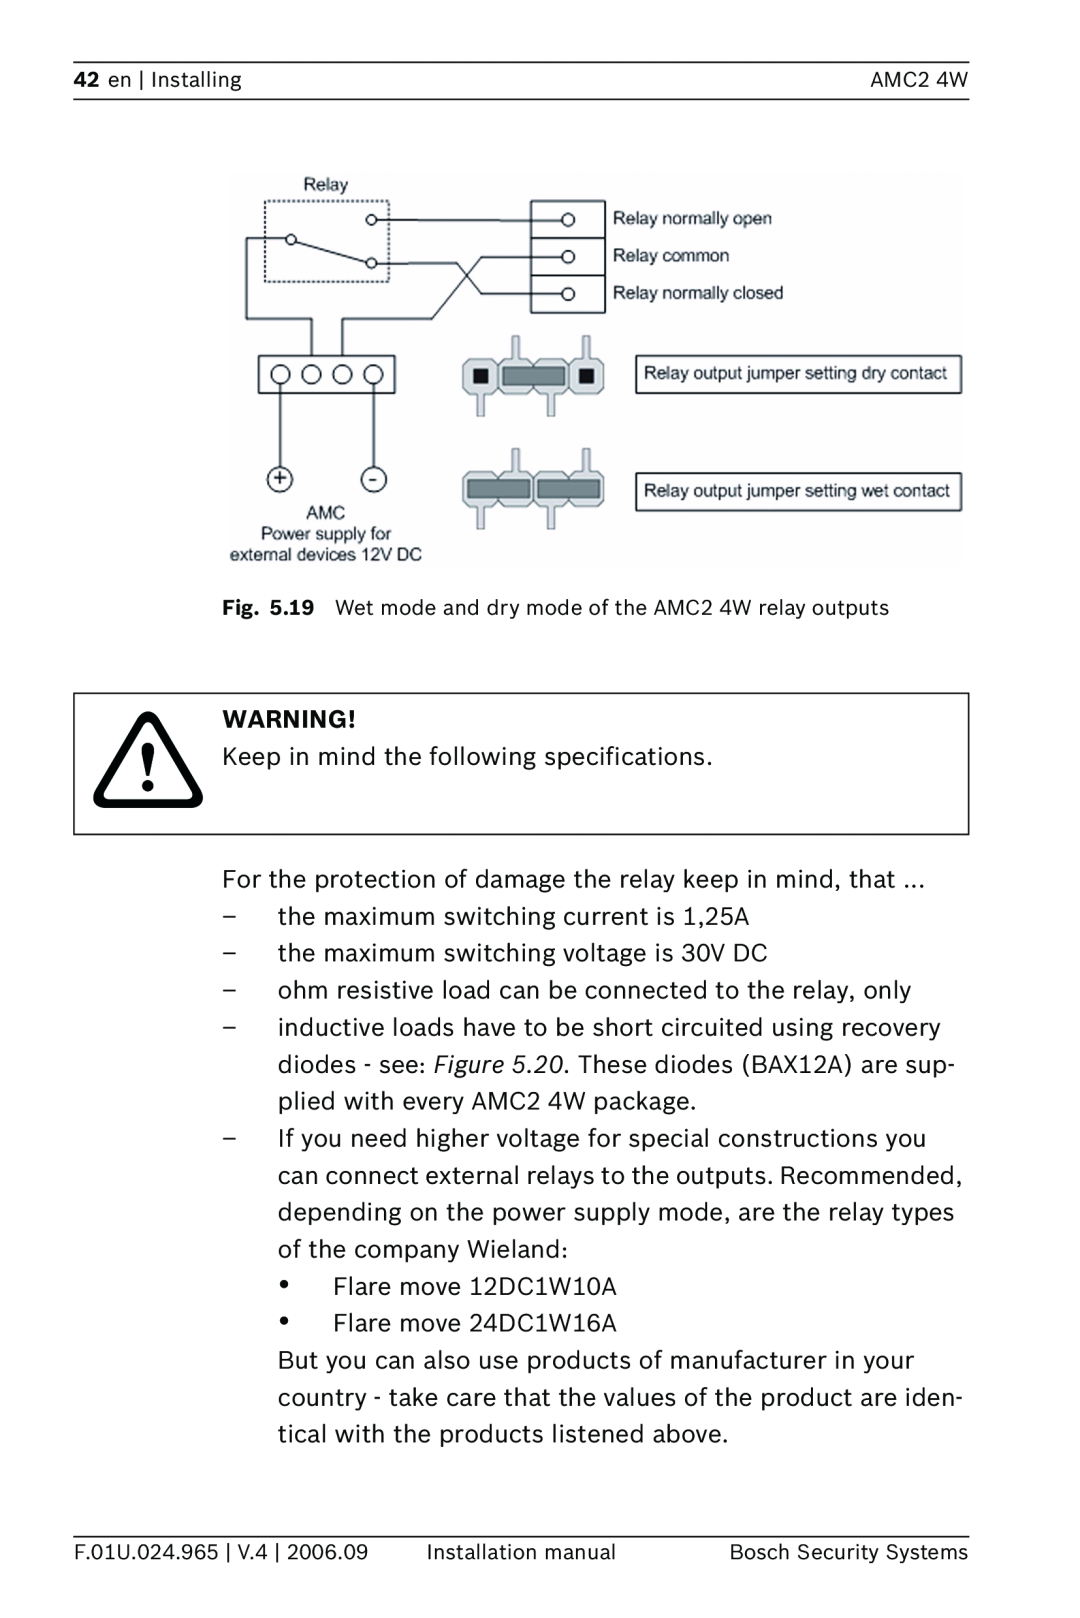 Bosch Appliances APC-AMC2-4WUS, APC-AMC2-4WCF installation manual Keep in mind the following specifications 